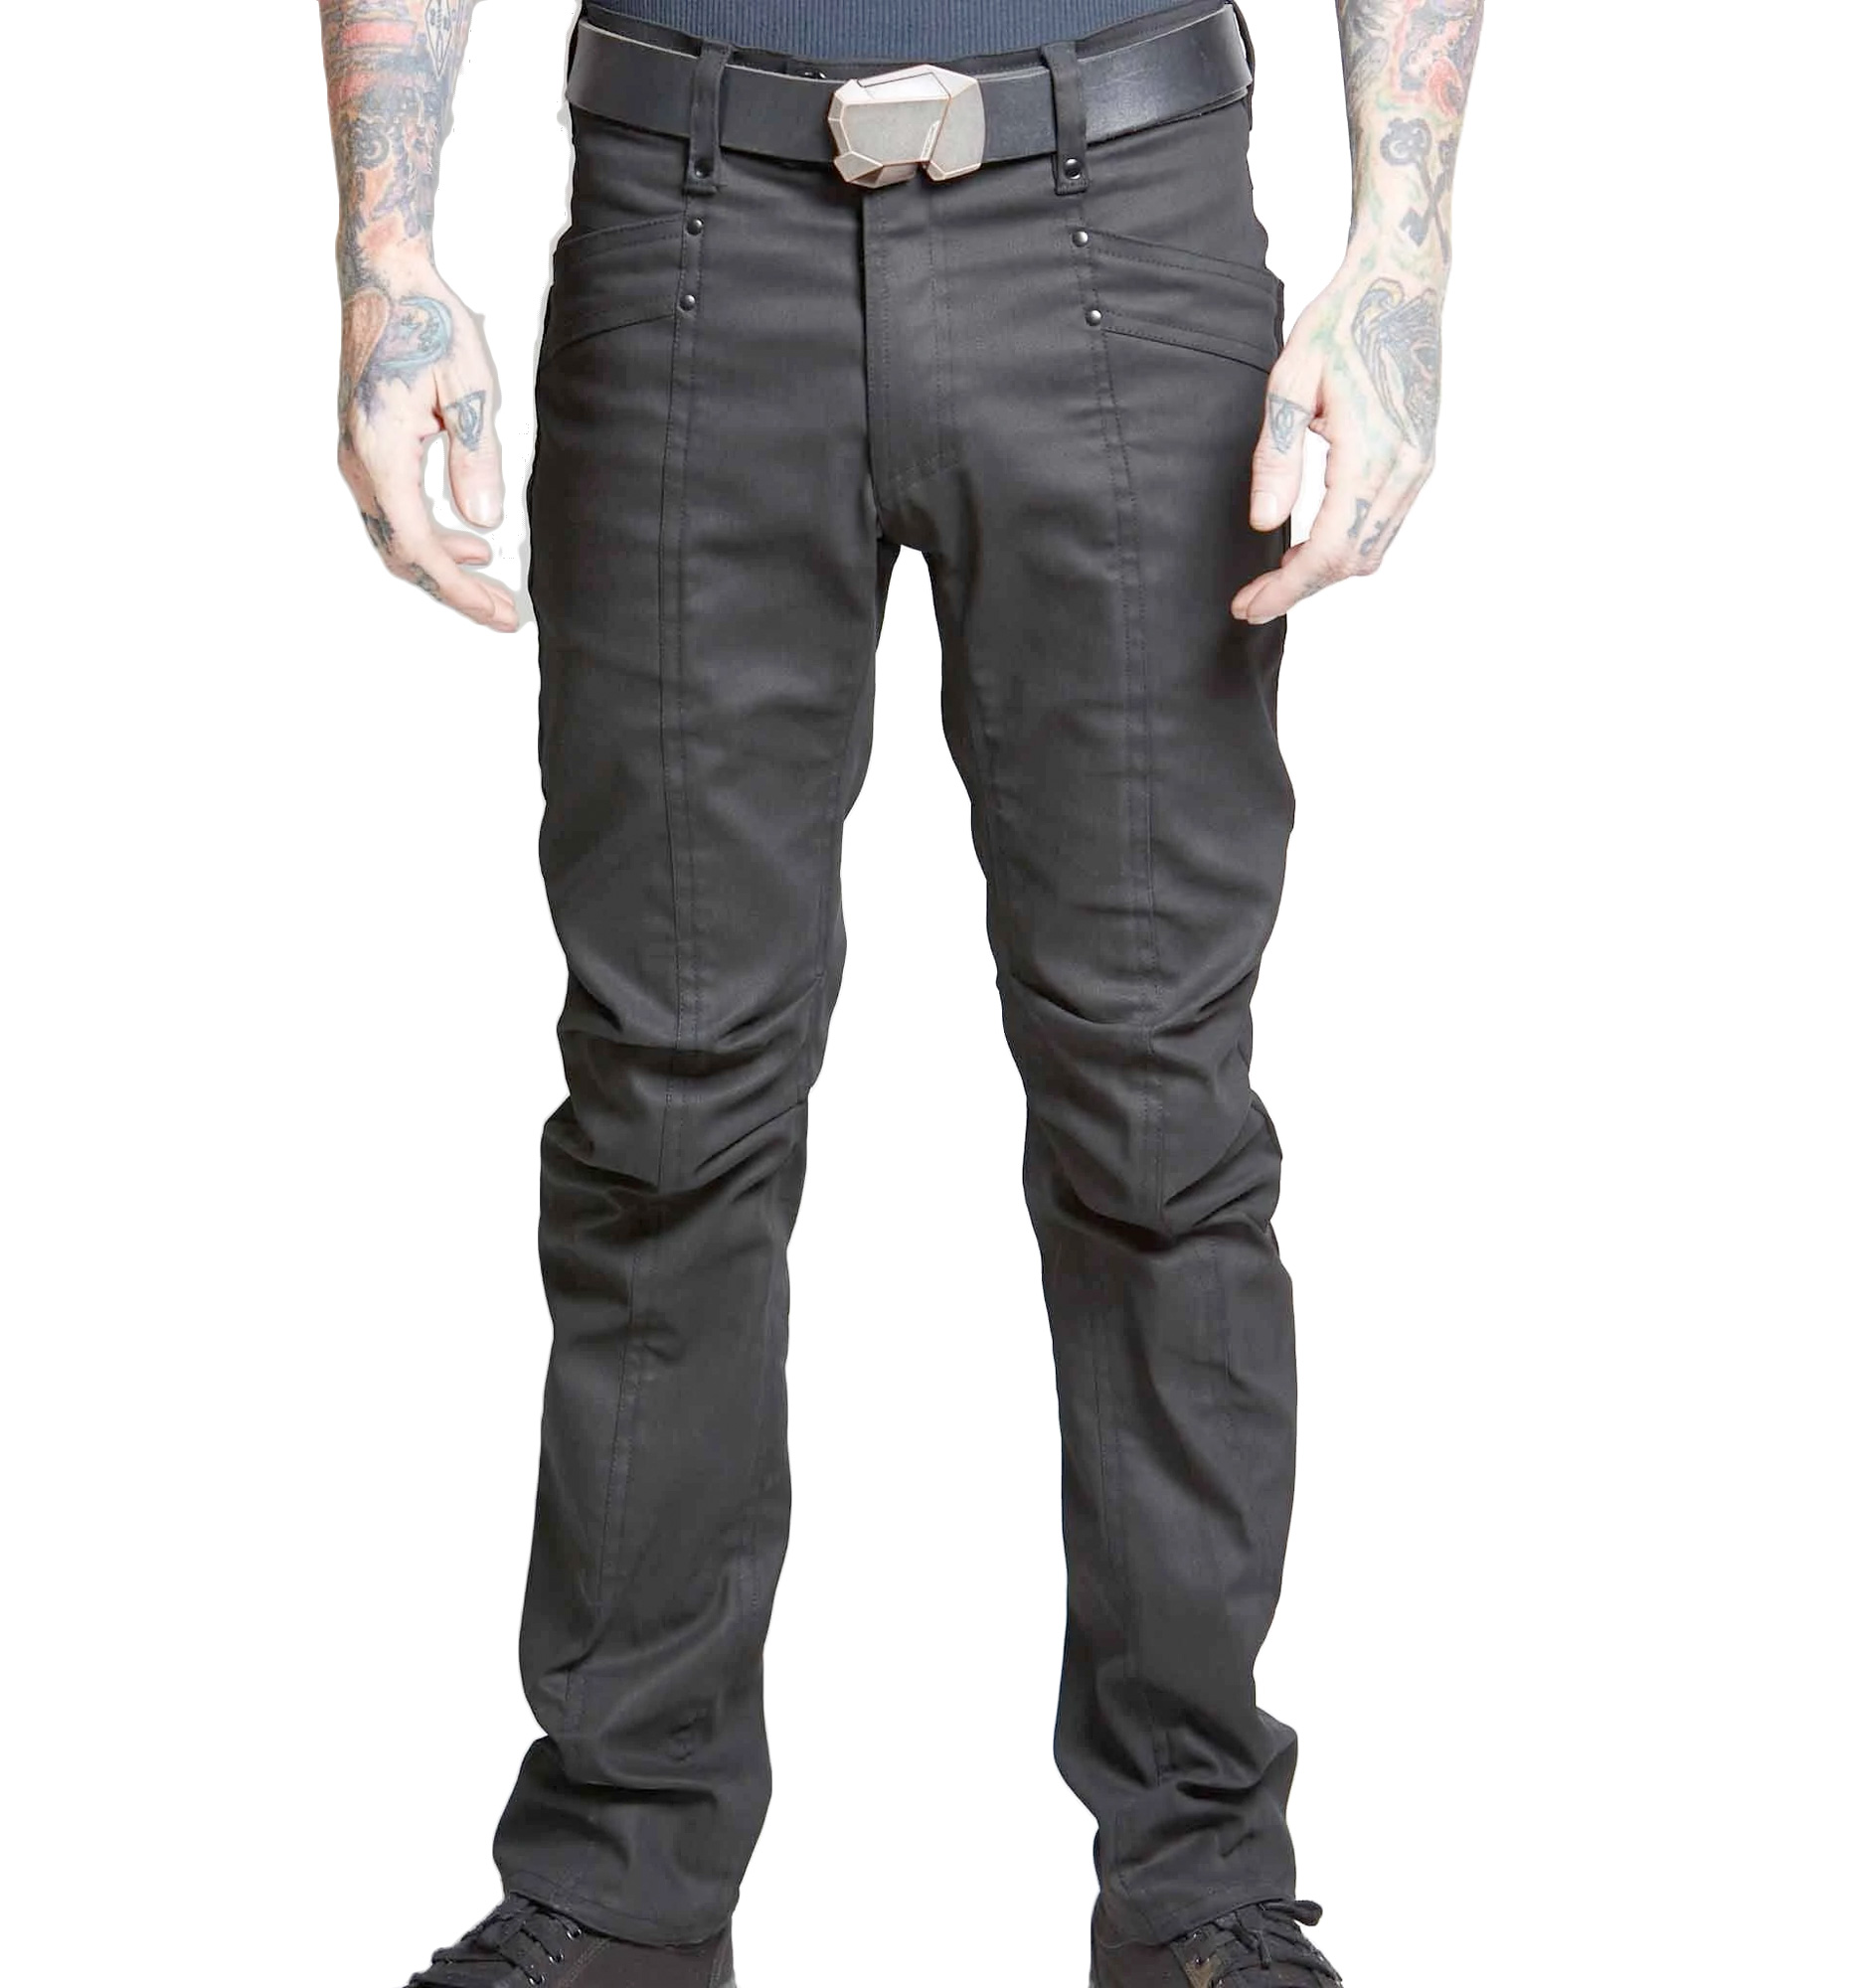 Crisiswear Foundation MKI Pants - Waxed : Delicious Boutique